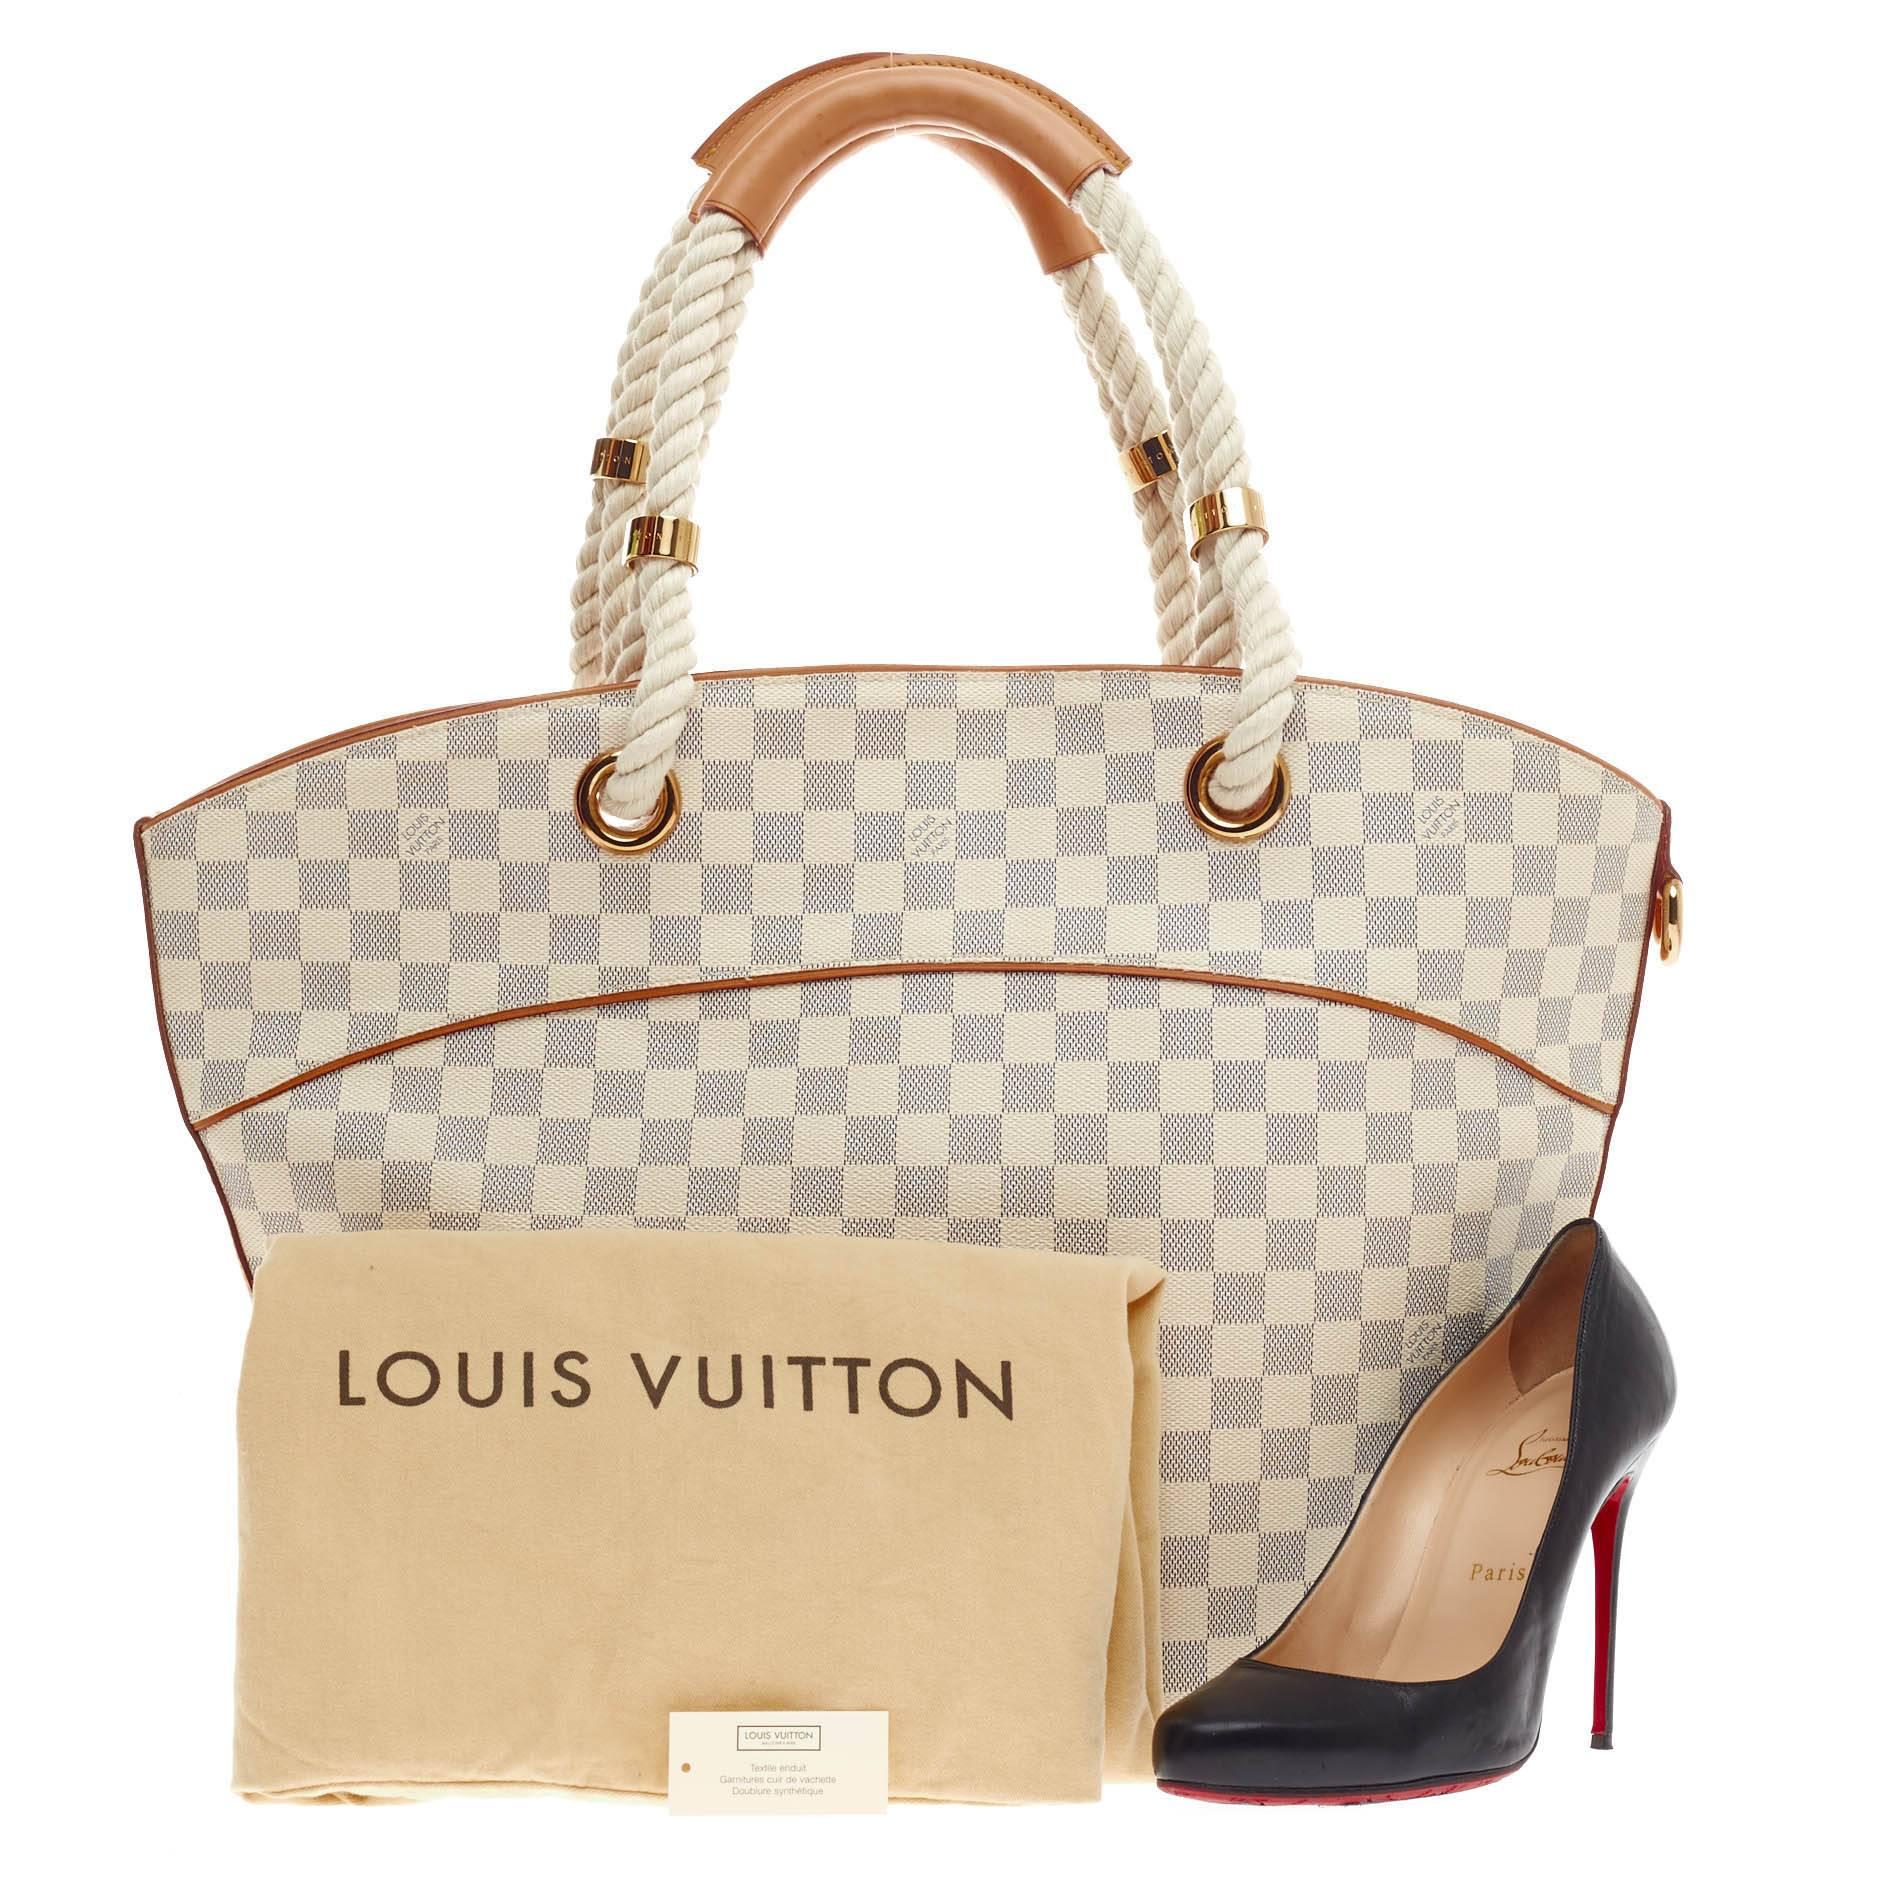 This authentic Louis Vuitton Pampelonne Damier PM aptly named after the Saint Tropez beach is luxurious and sophisticated in design perfect for day travels and light trips. Crafted in Louis Vuitton's signature damier azur canvas with cowhide leather